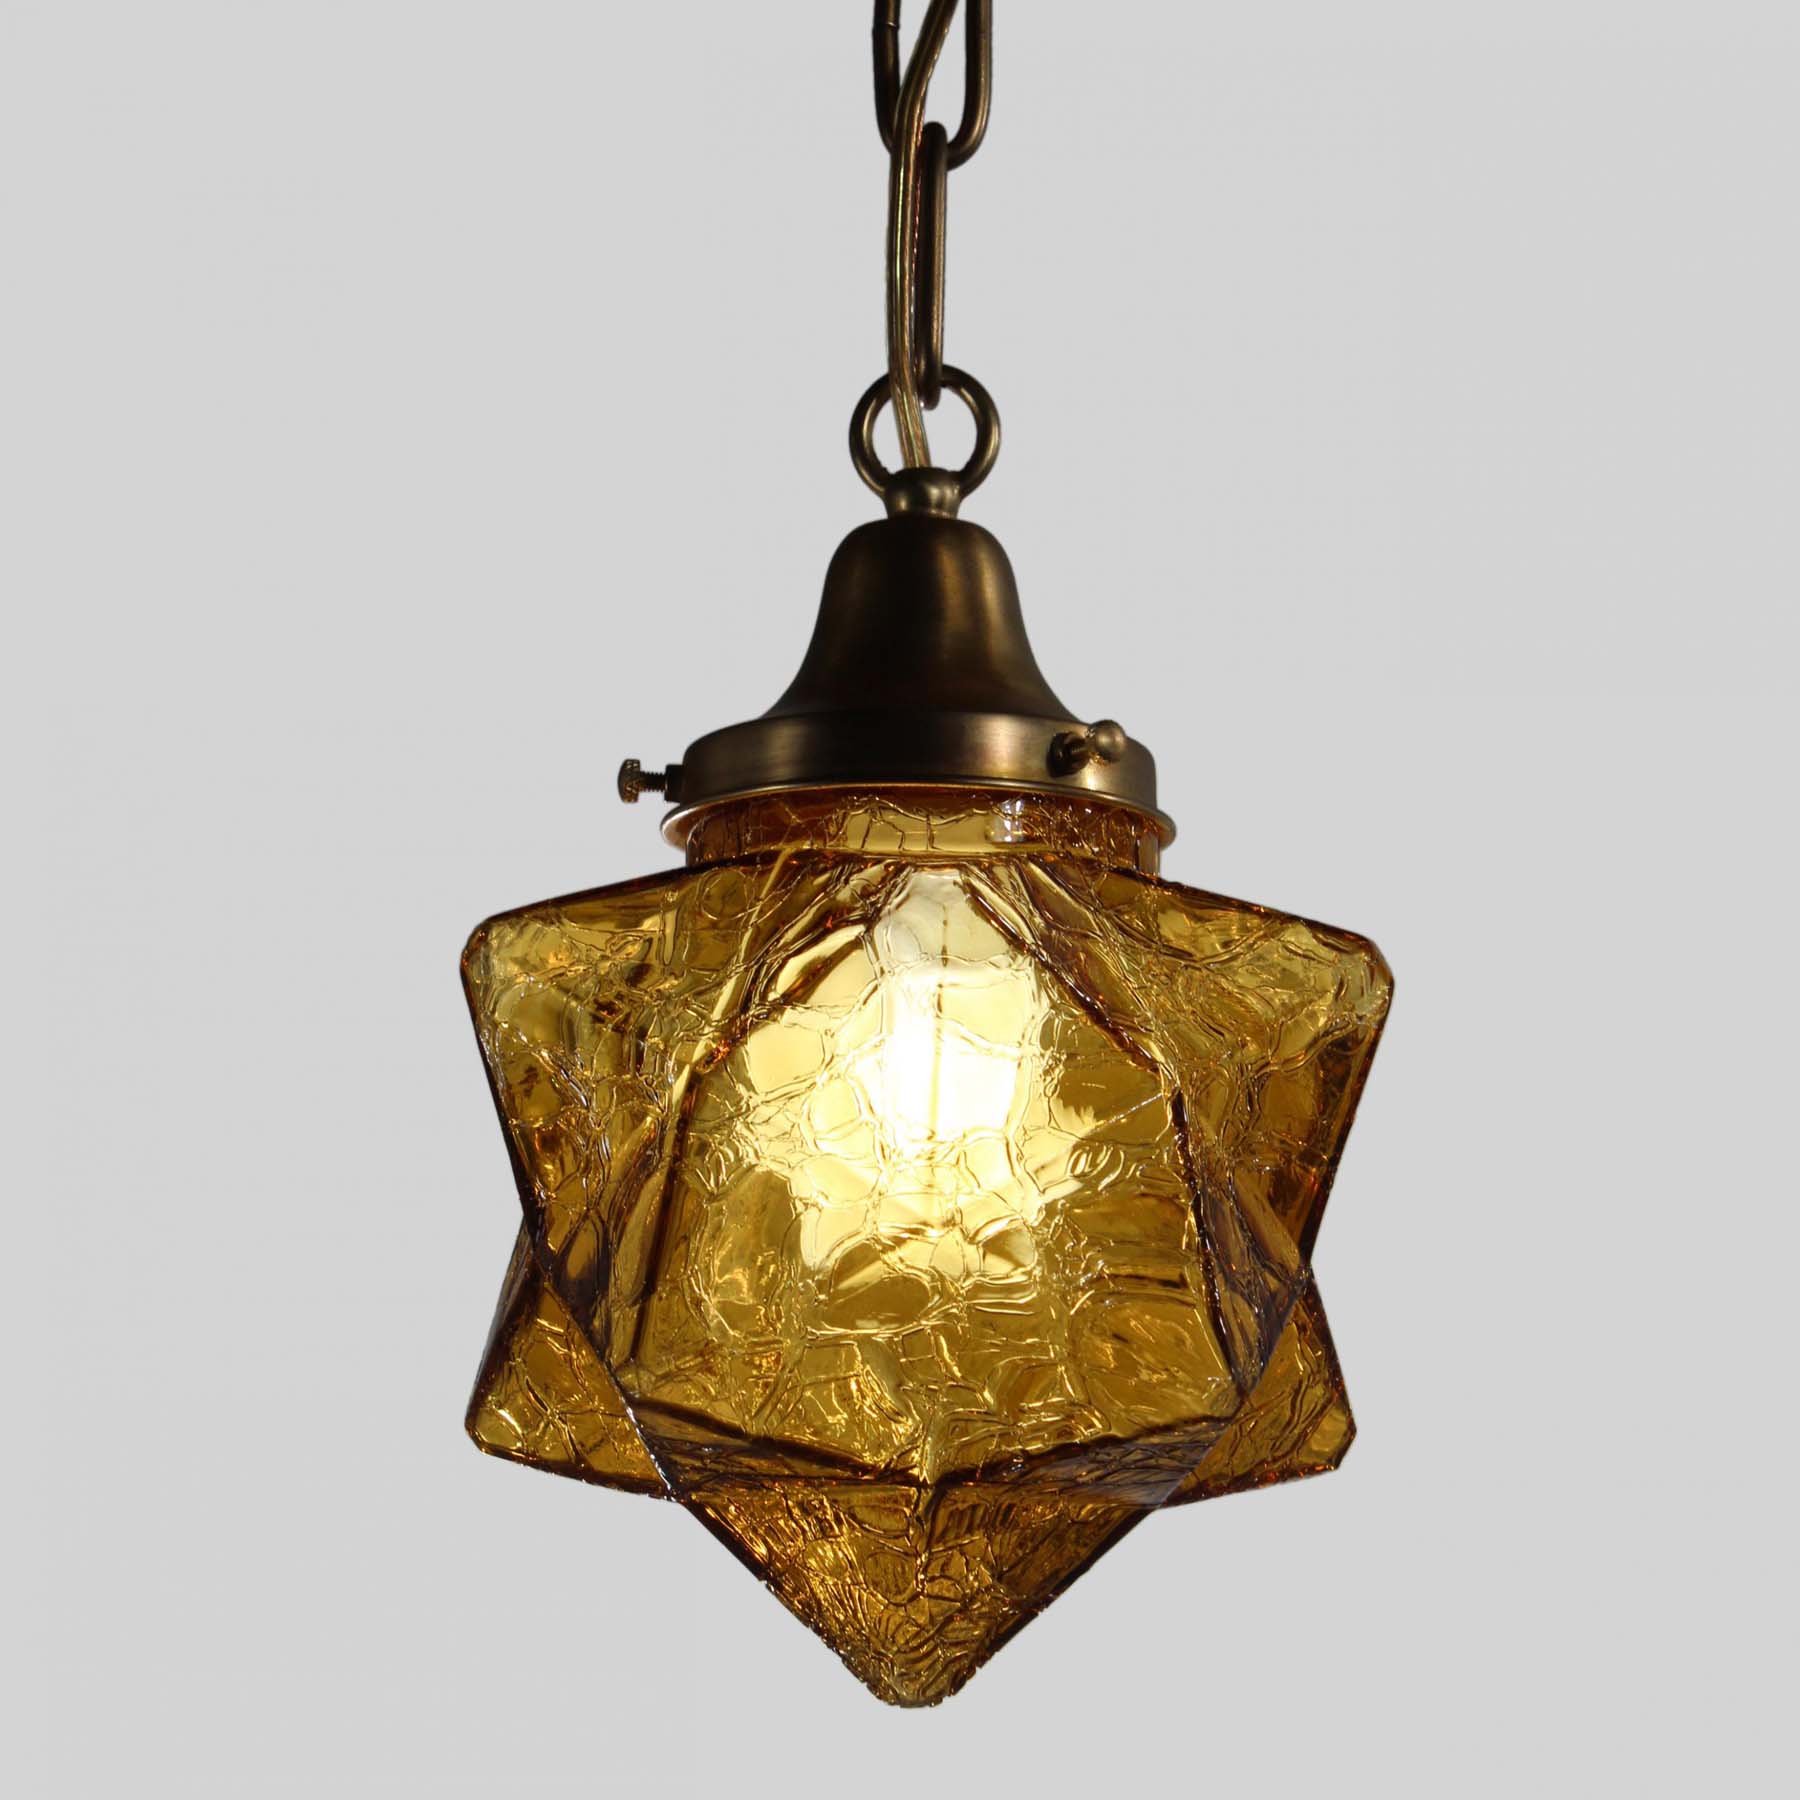 SOLD Pendant Light with Amber Crackle Glass, Antique Lighting-70760